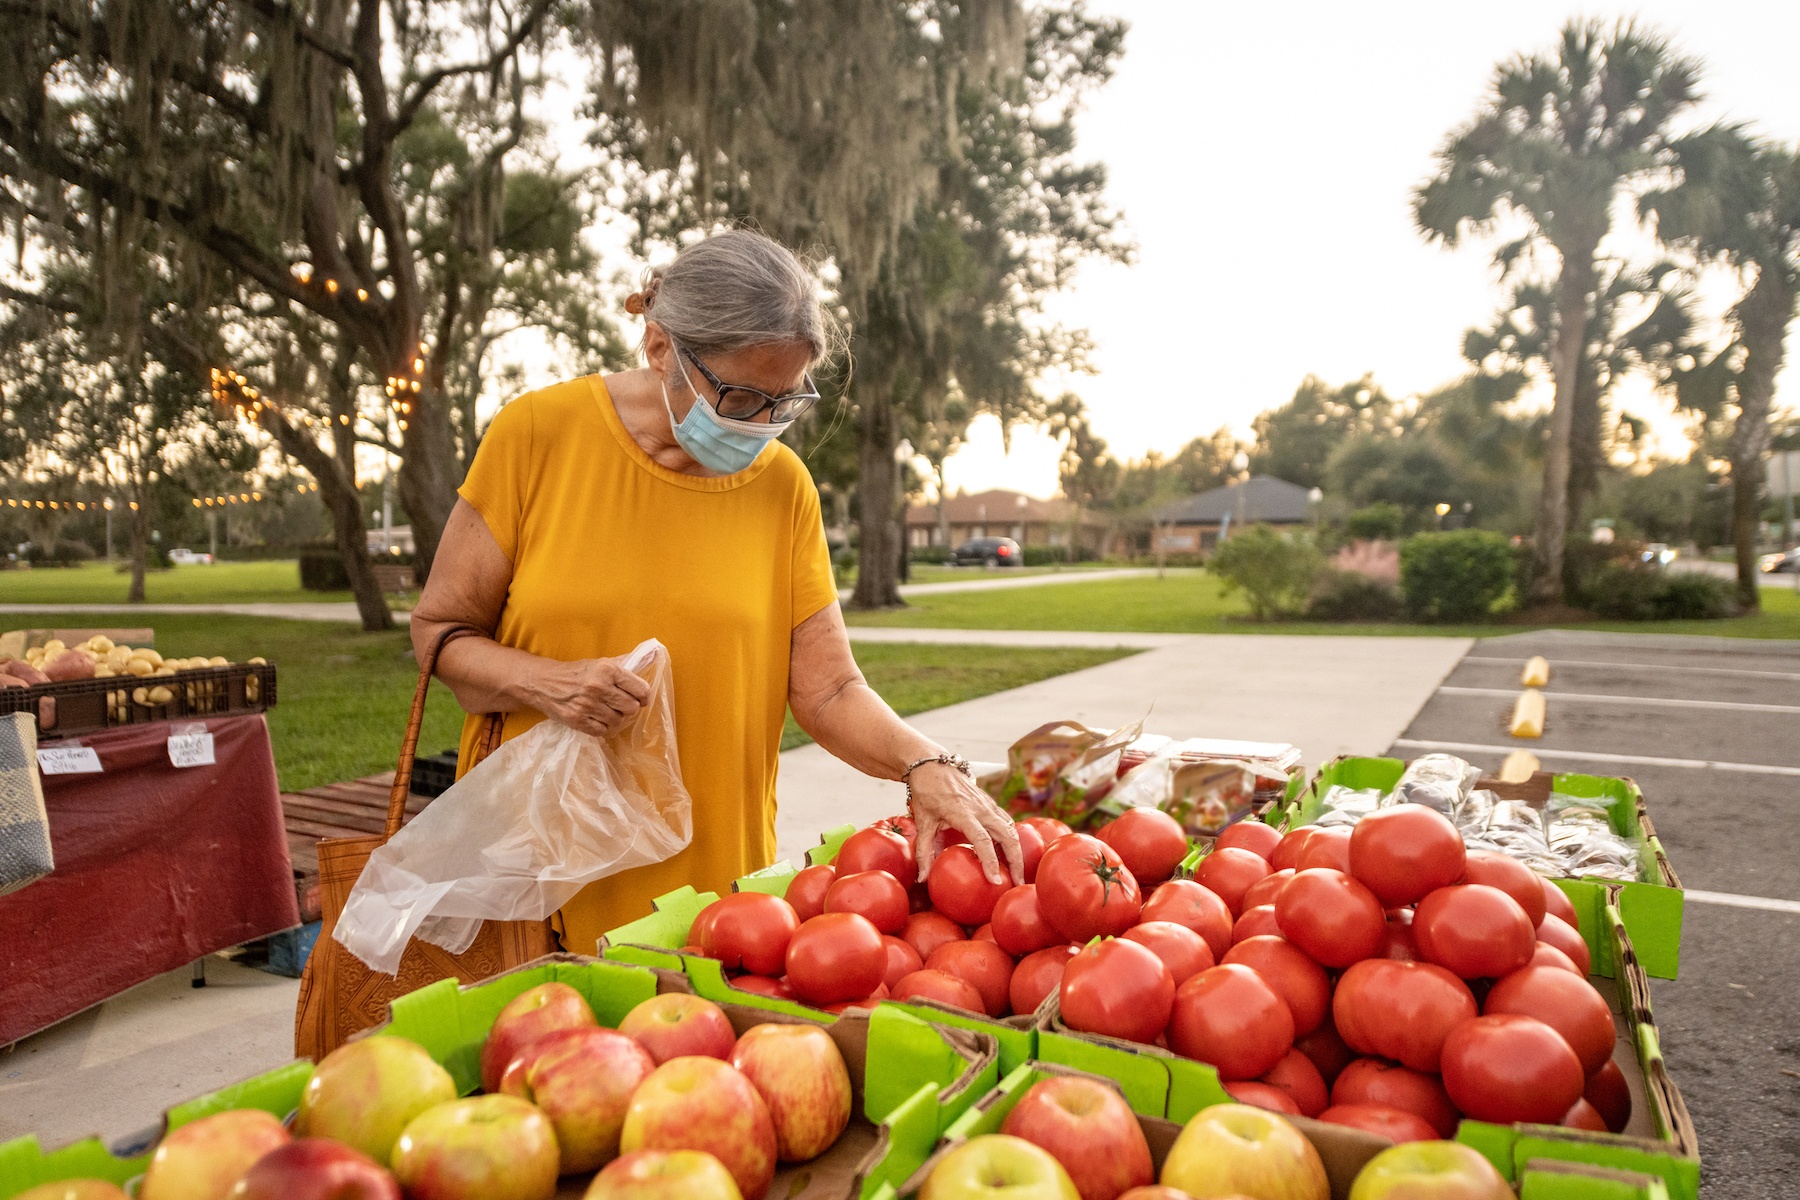 A senior woman of color picks tomatoes at a farmer's market in Apopka, Florida. August 2021